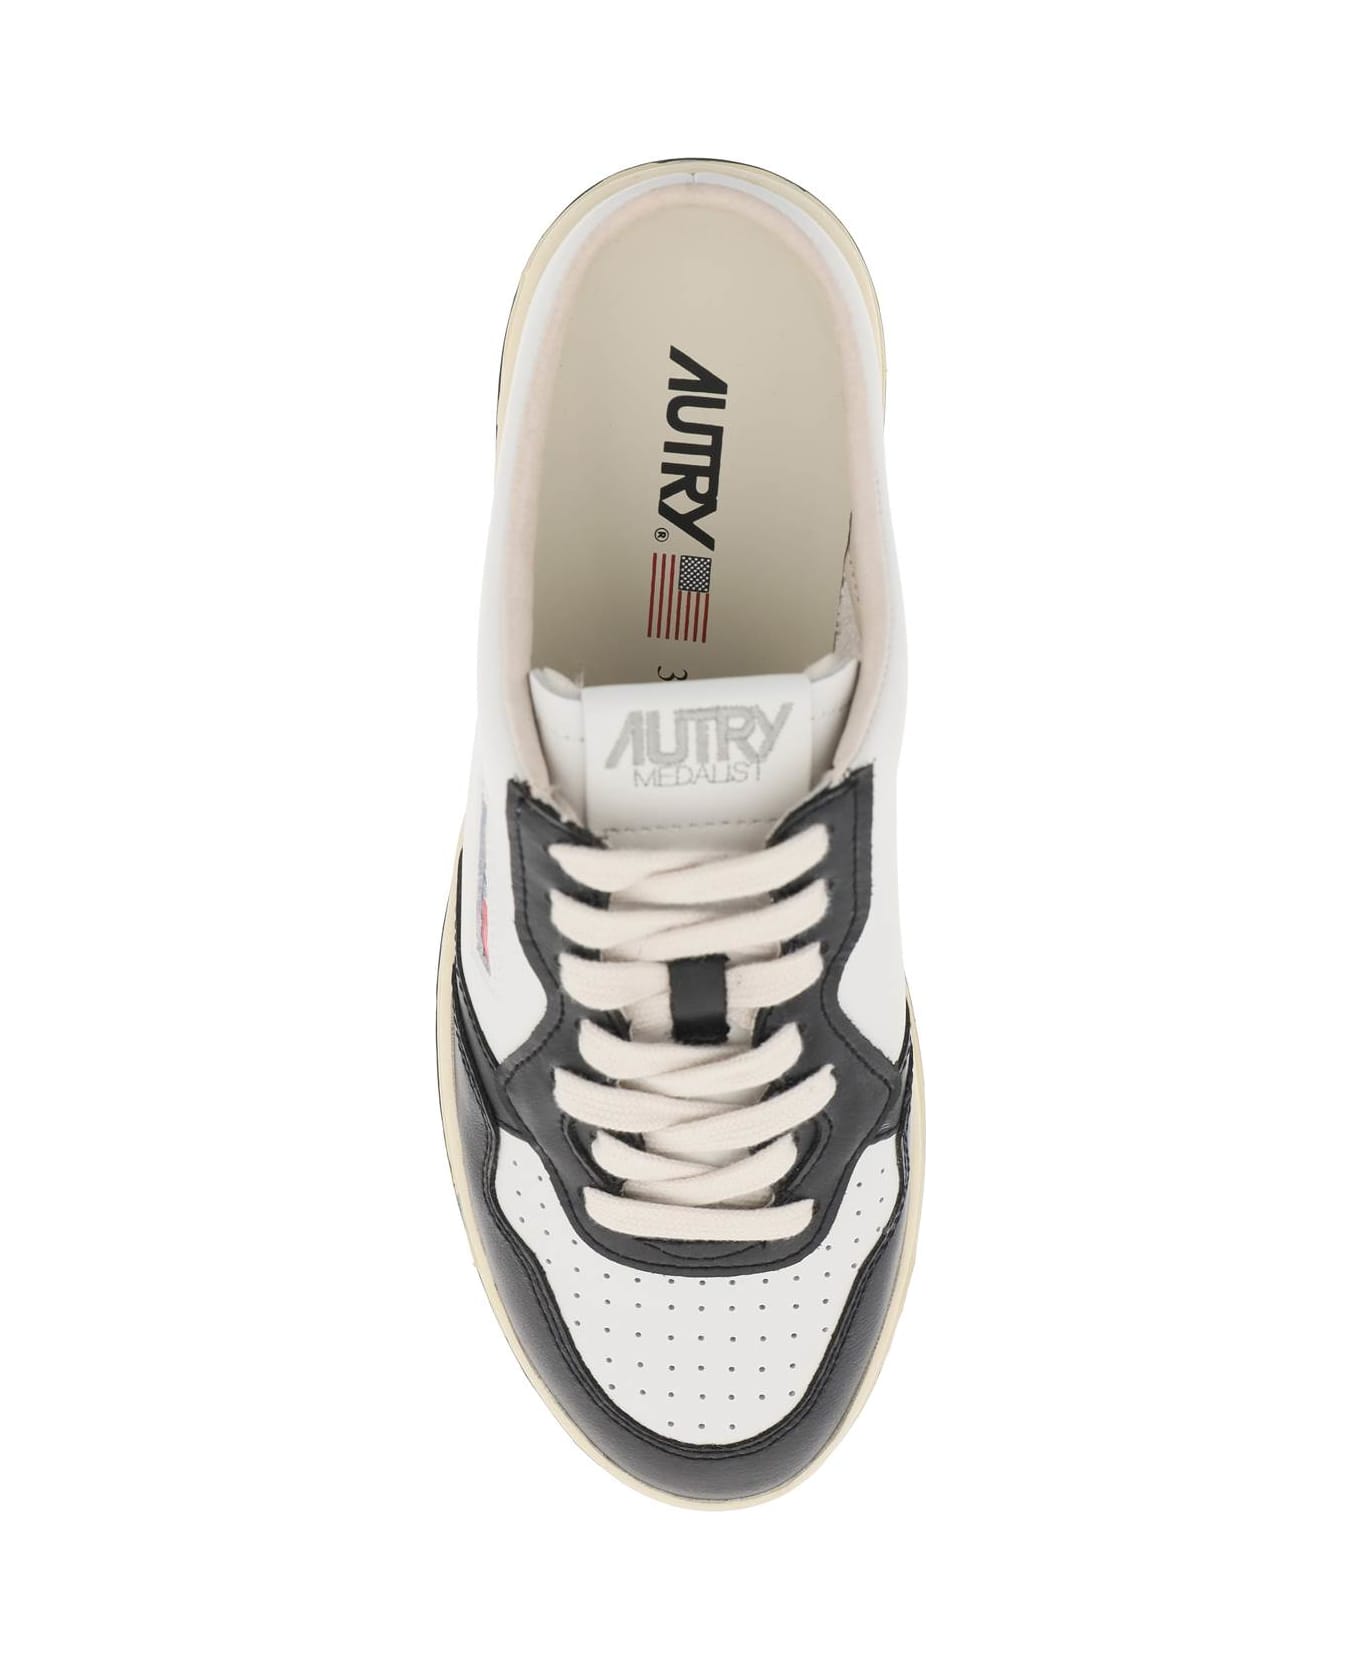 Autry Medalist Mule Low Sneakers - WHITE BLACK (White) スニーカー